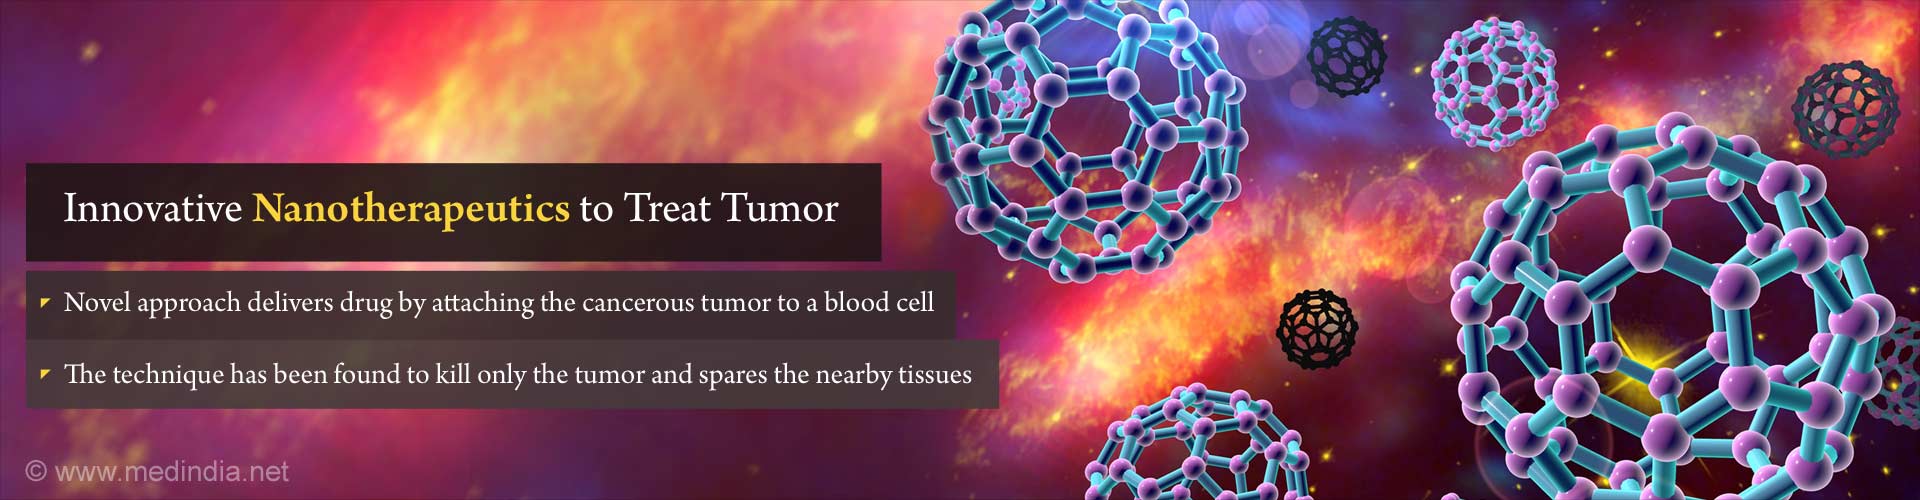 Innovative nanotherapeutics to treat tumor
-Novel approach delivers drugs by attaching the cancerous tumor to a blood cell
- The technique has been found to kill only the tumor and spares the nearby tissues